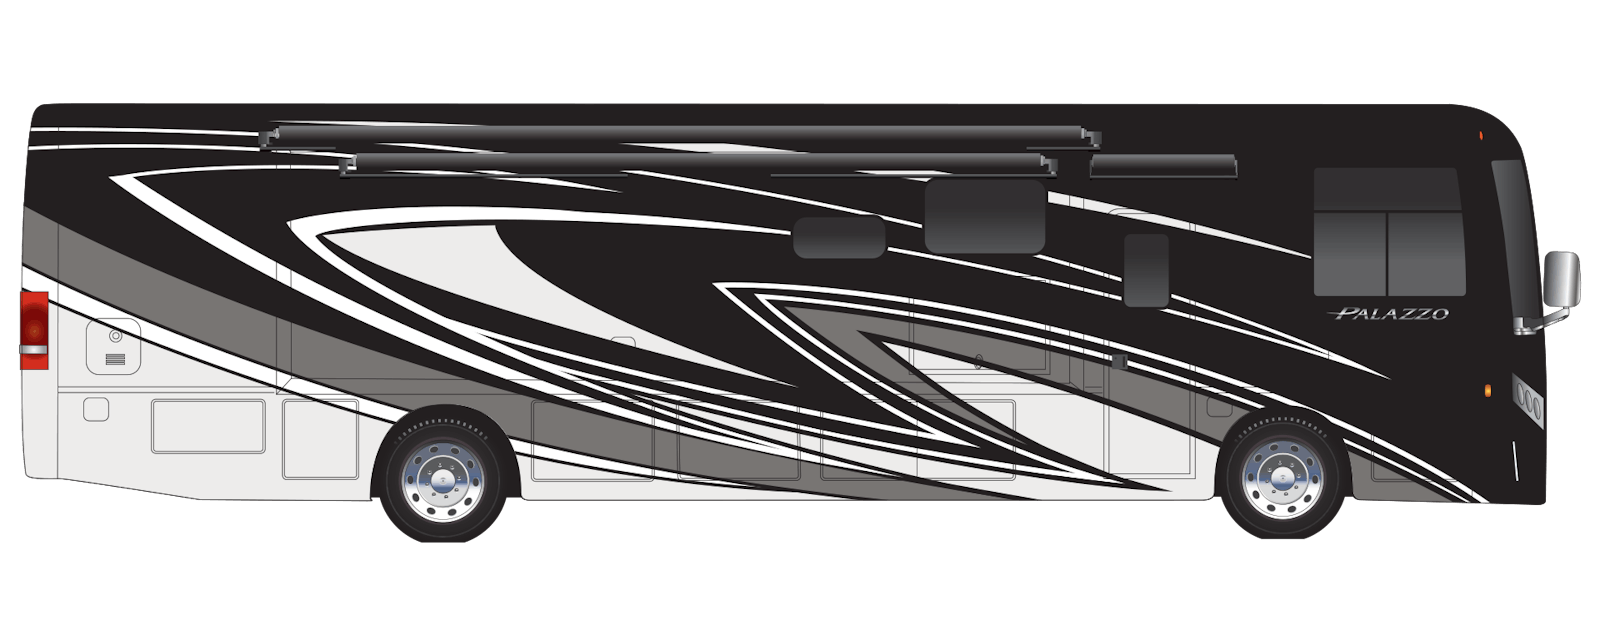 2023 Thor Palazzo Class A Diesel Pusher RV Winged Foot Full Body Paint Exterior Artwork